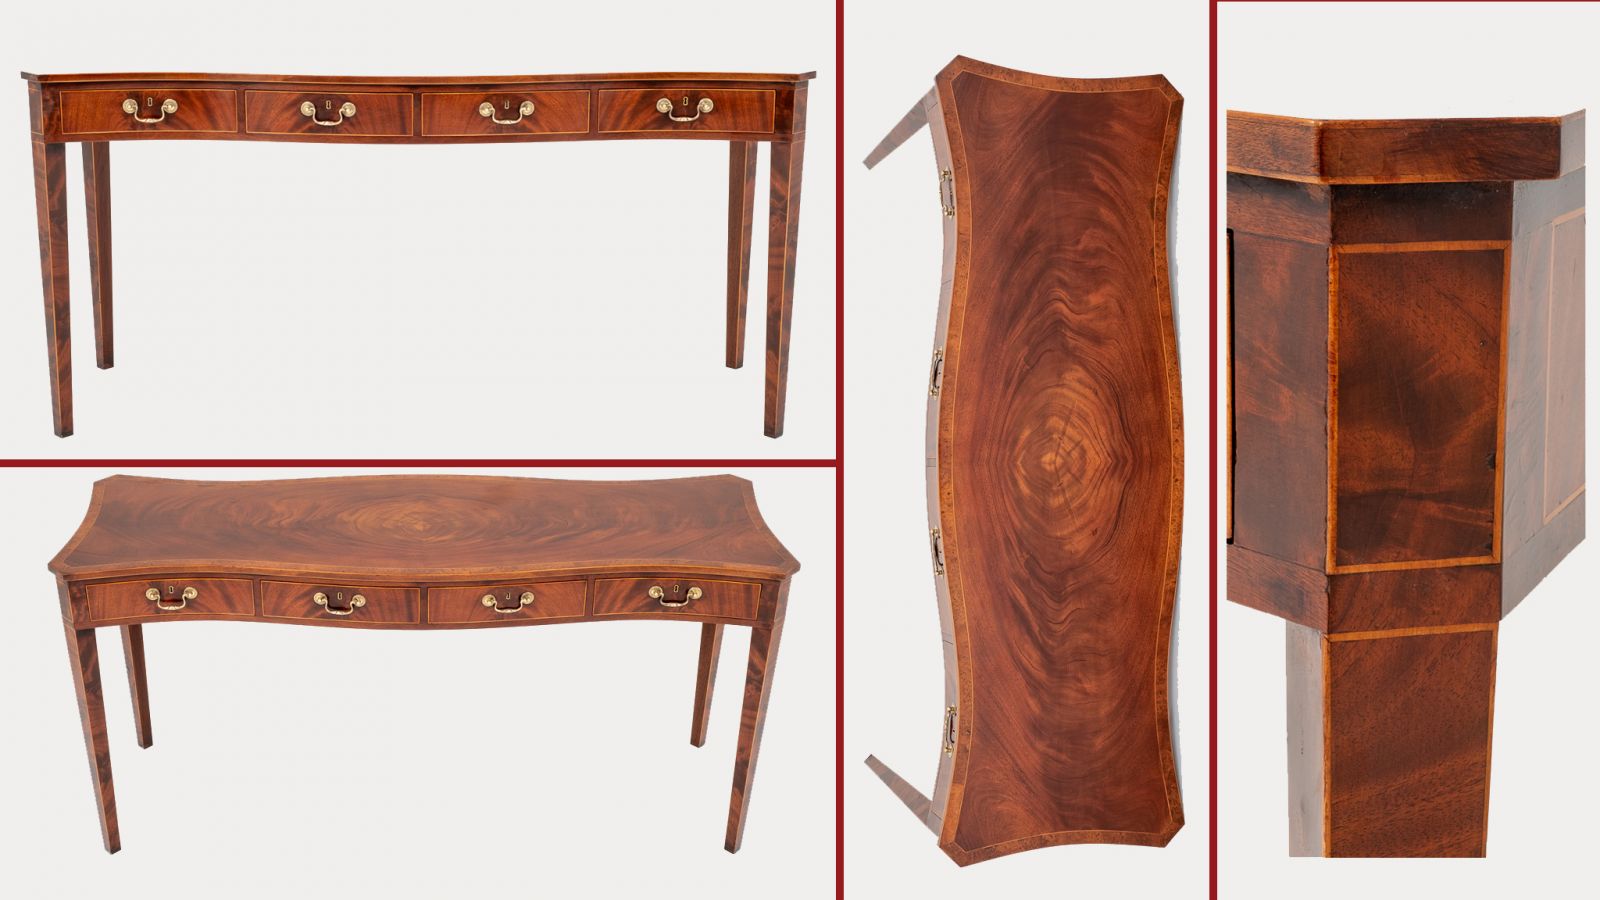 Serpentine hall table in mahogany antique